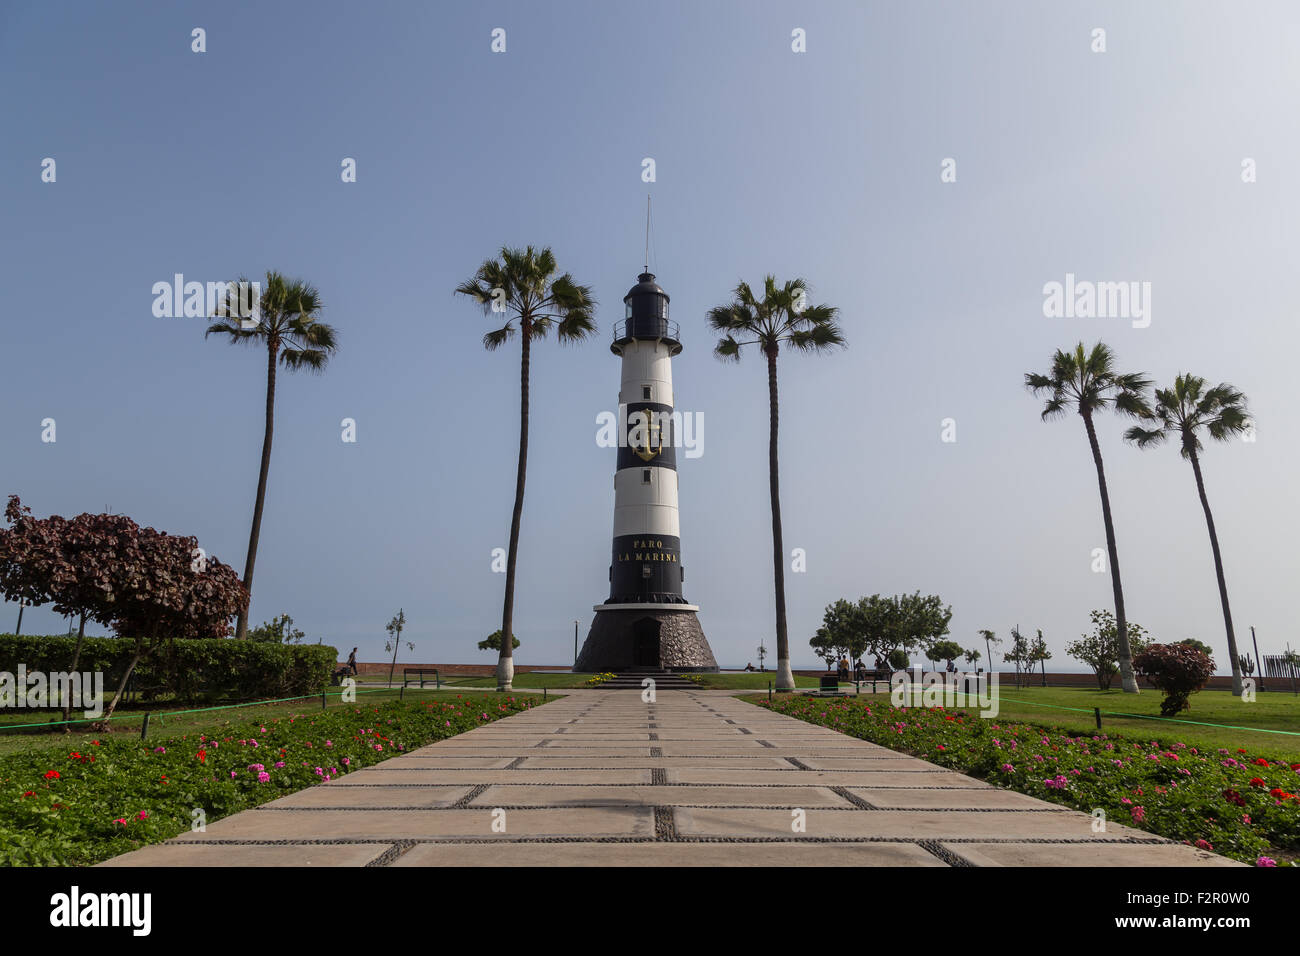 Lima, Peru - 29 August, 2015: Photograph of the lighthouse Faro de Marina in the district Miraflores. Stock Photo